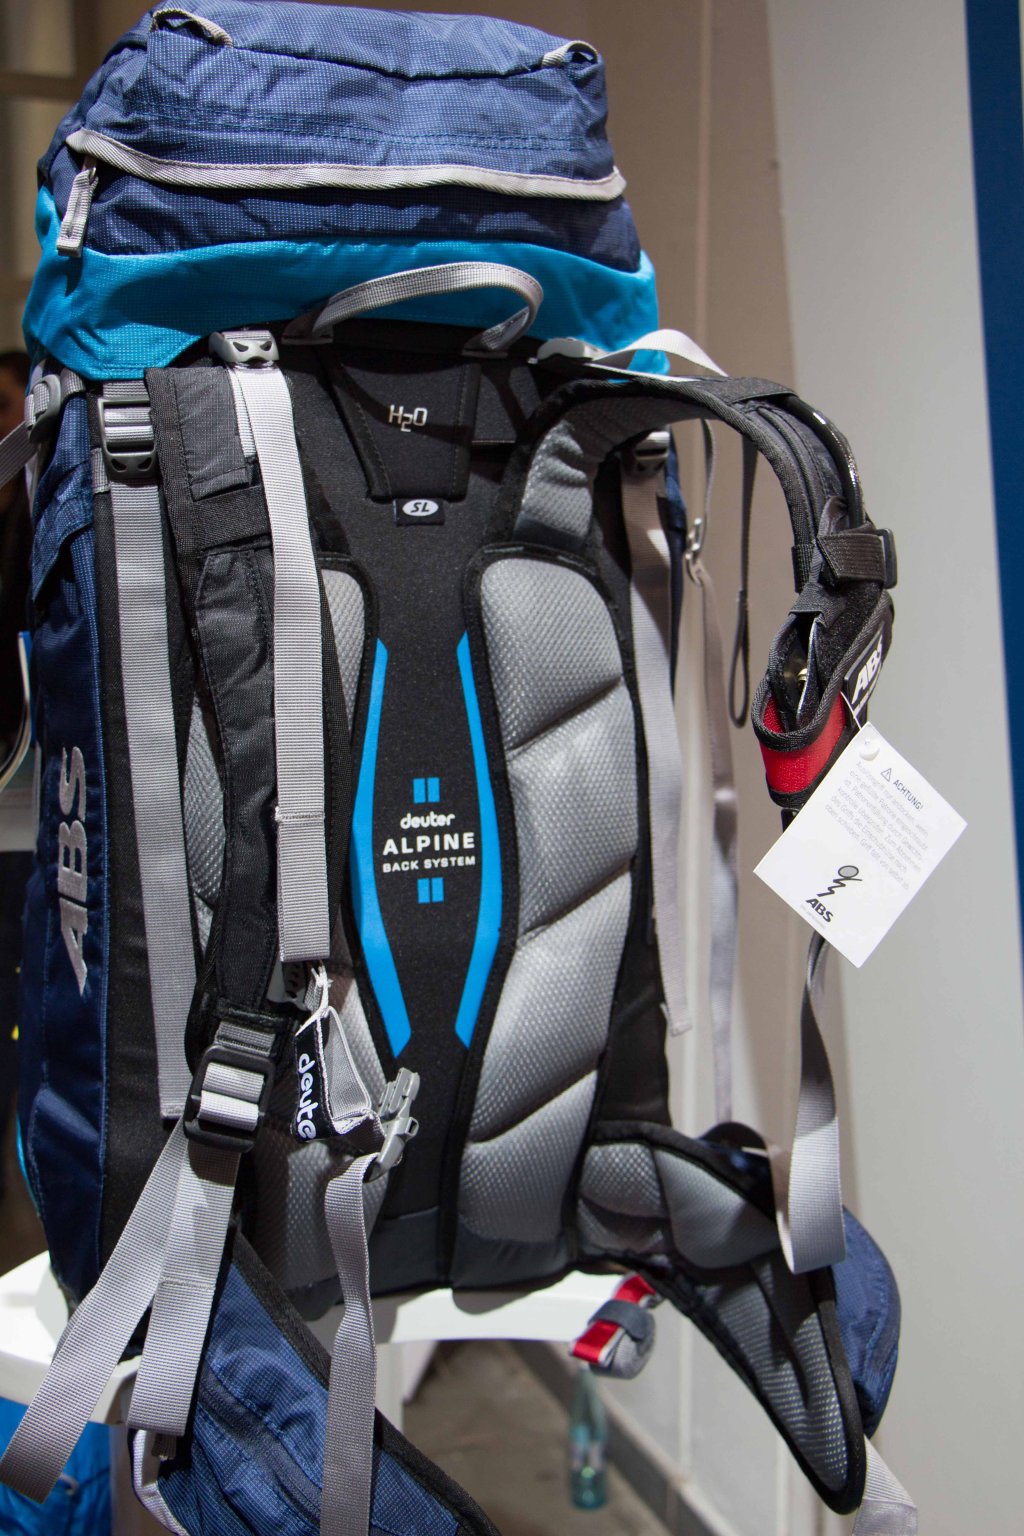 Large airbag backpack from Deuter: OnTop Tour ABS 38+